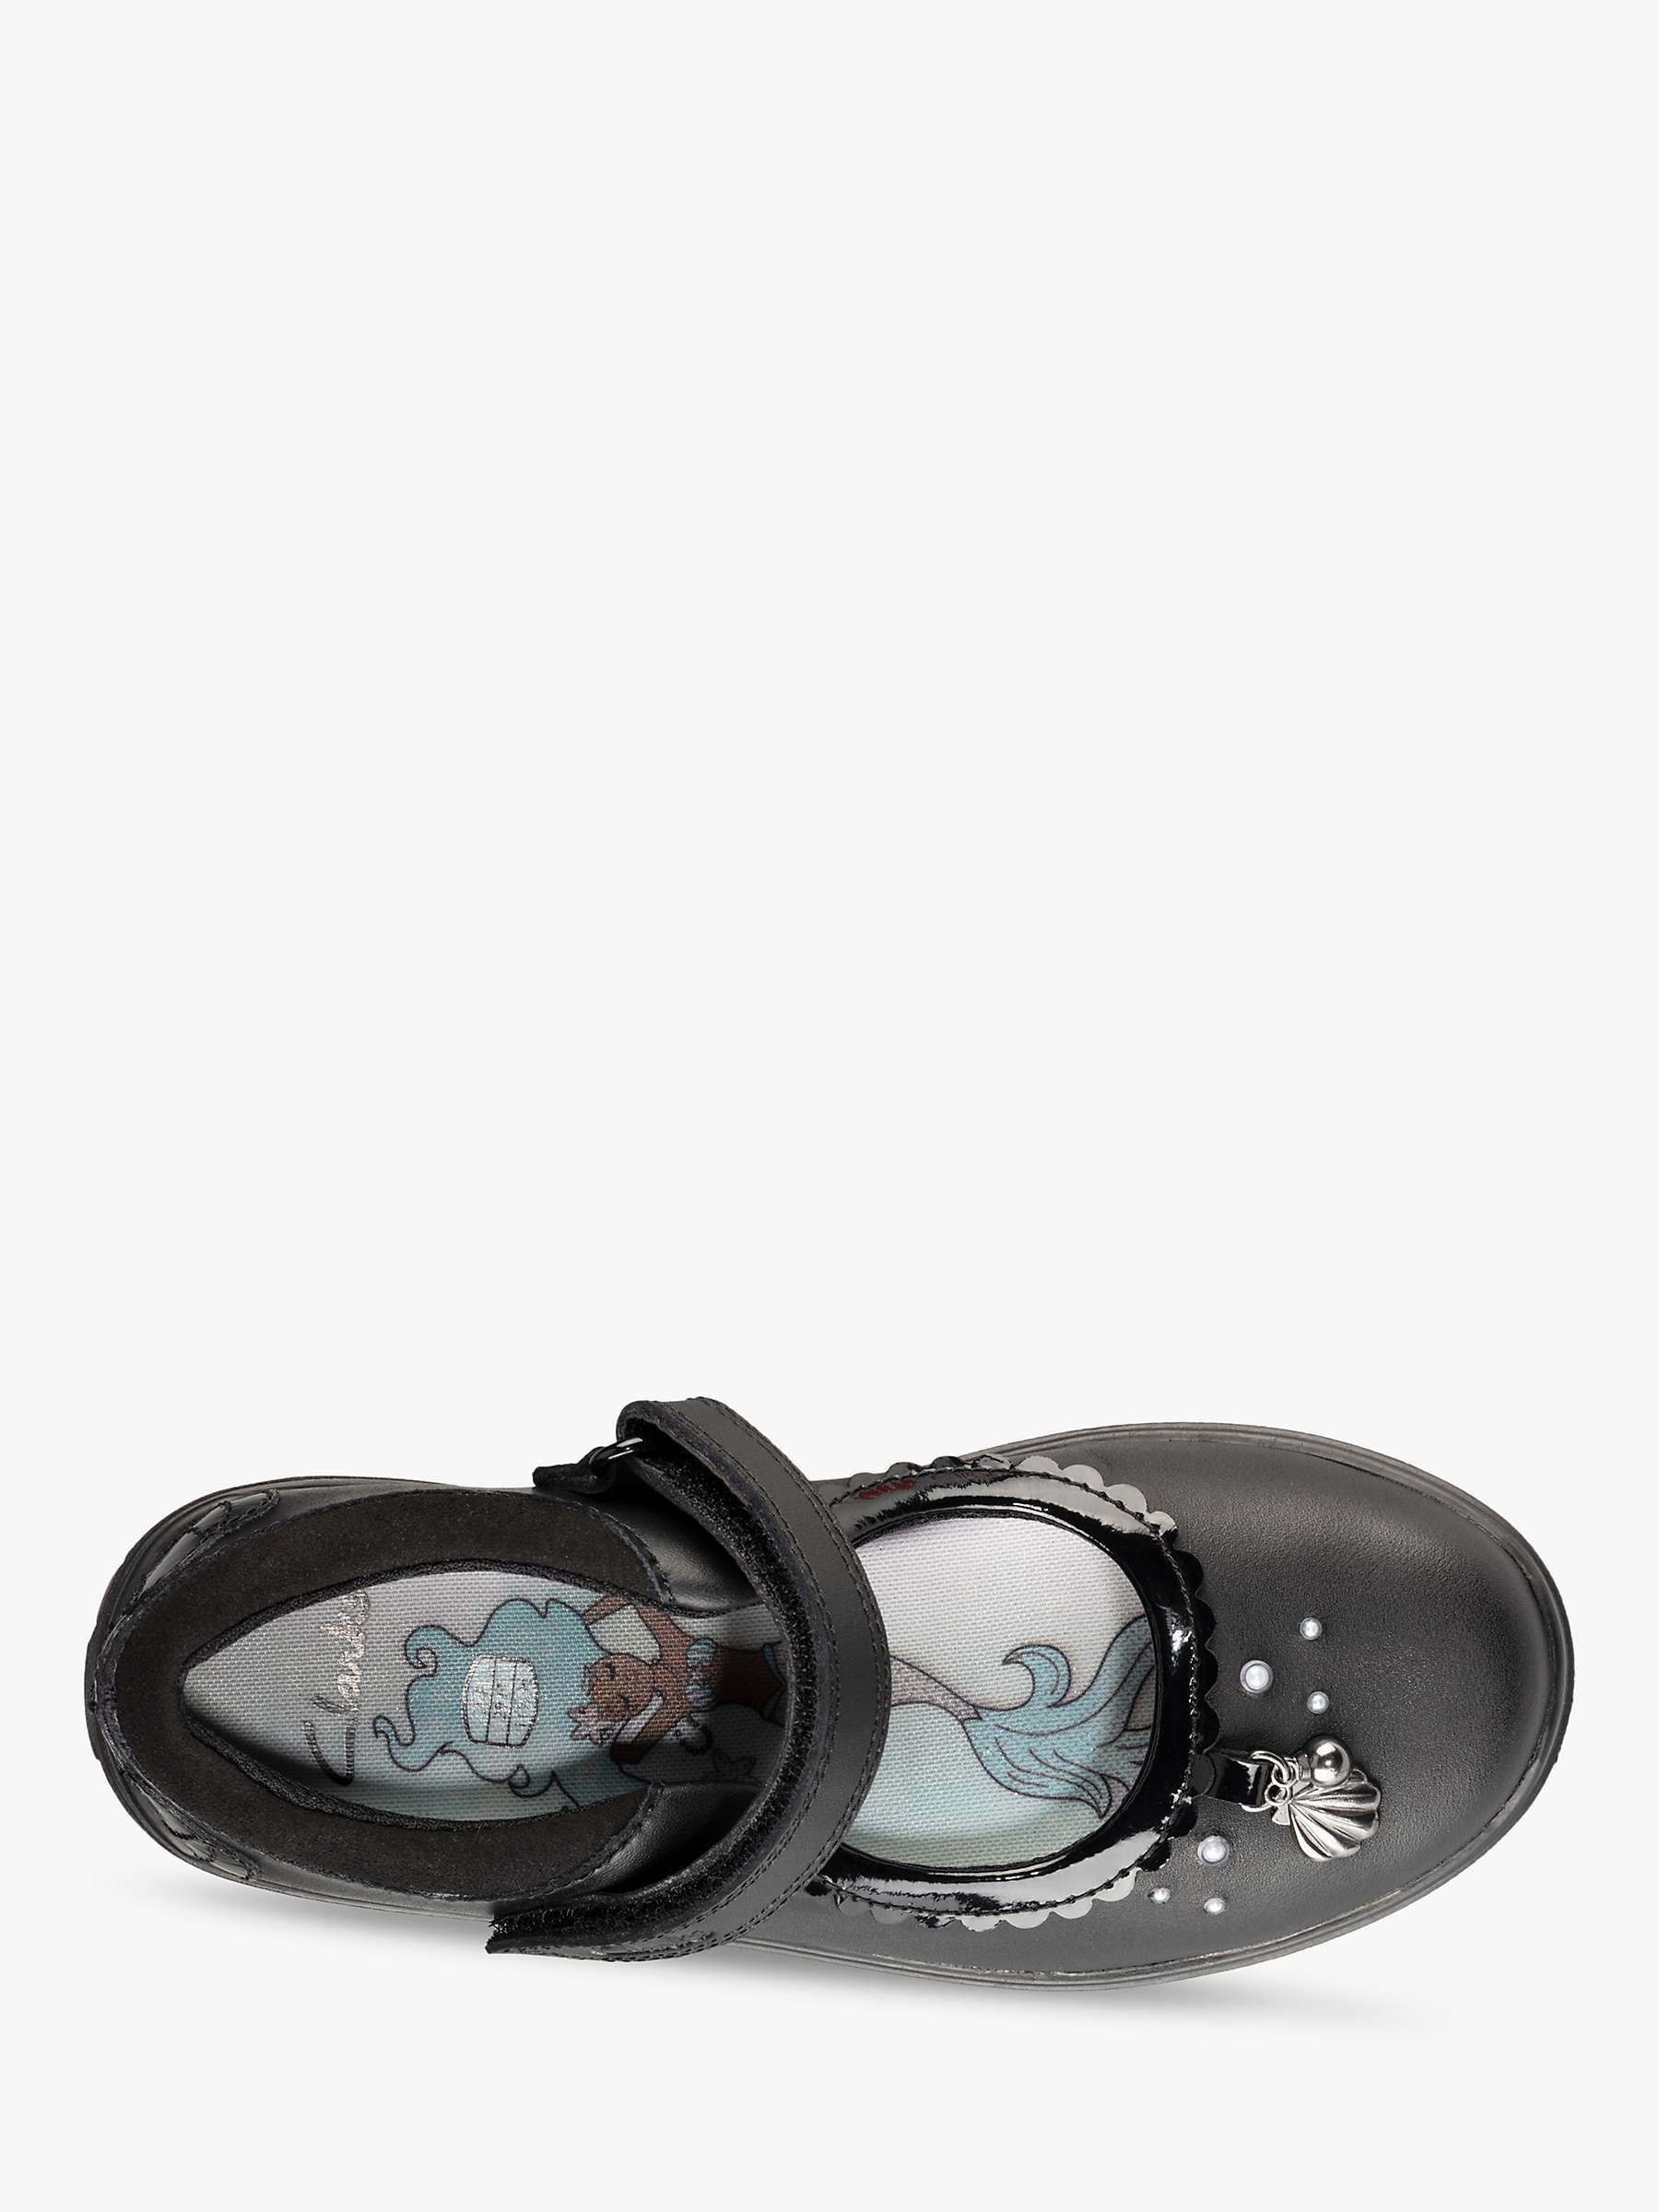 Buy Clarks Children's Sea Simmer Mary Jane School Shoes Online at johnlewis.com